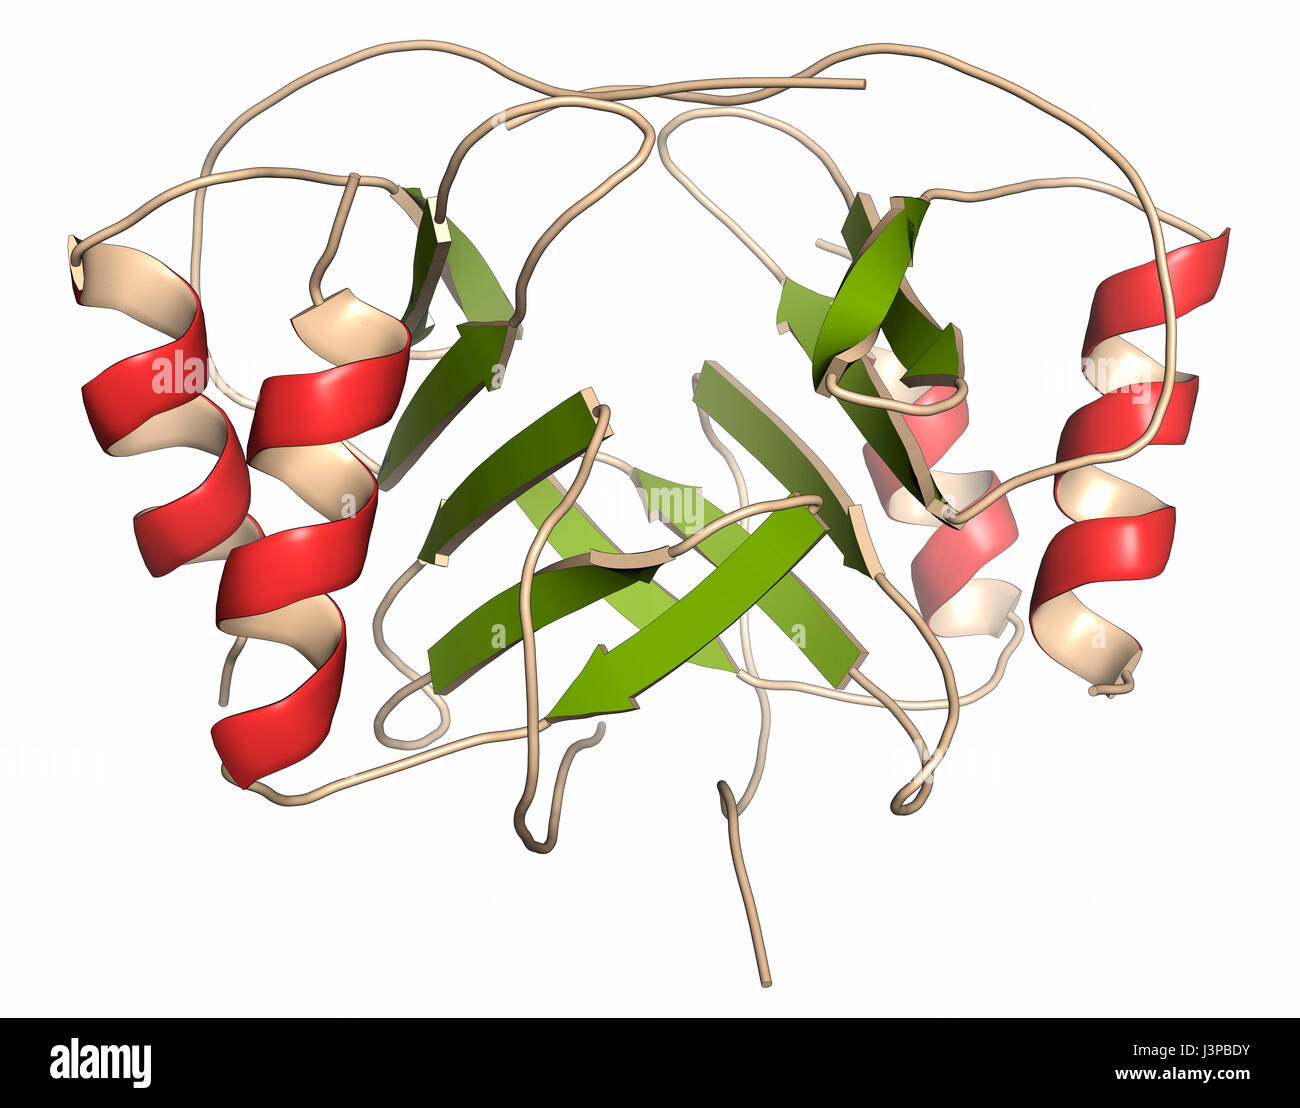 Platelet factor 4 (PF-4) chemokine protein. Cartoon representation. Secondary structure coloring. Stock Photo